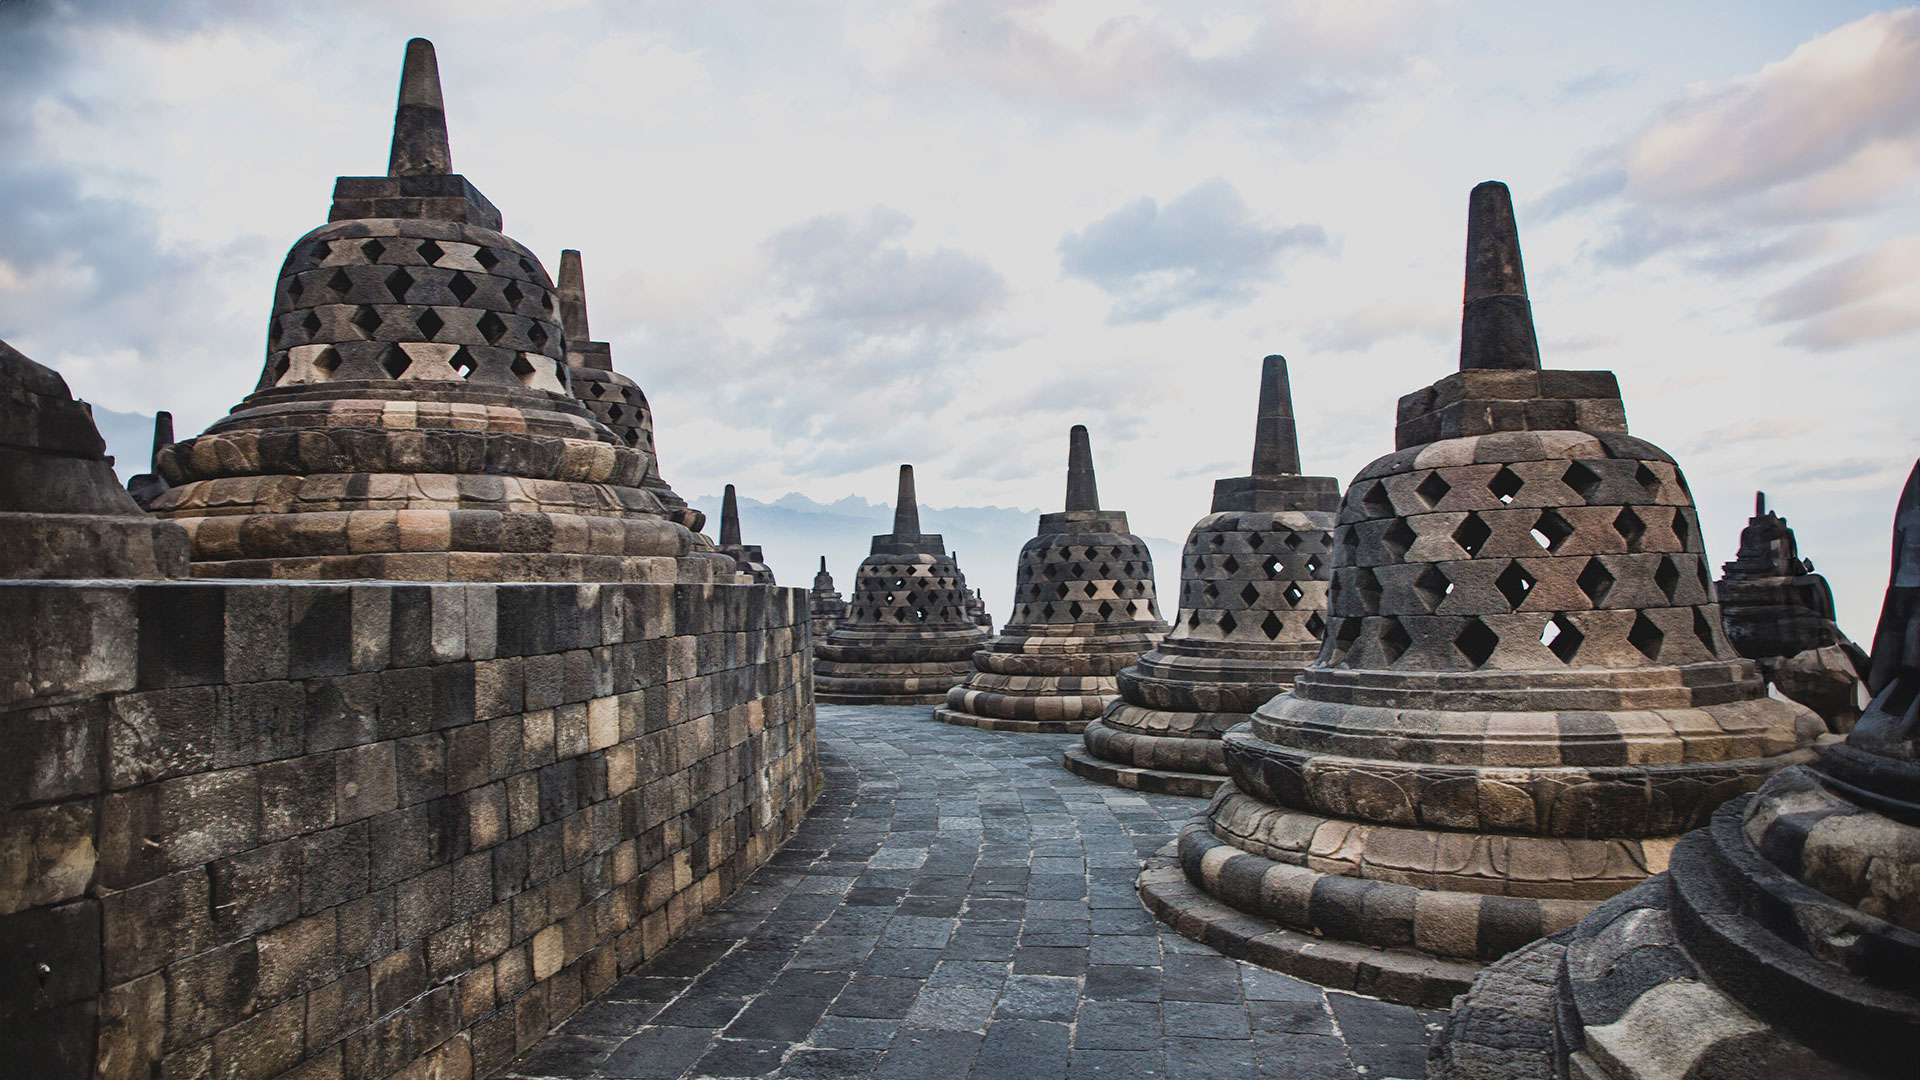 Javanese Joy: From Jakarta to the temple to the sea, the world’s most populous island draws visitors galore